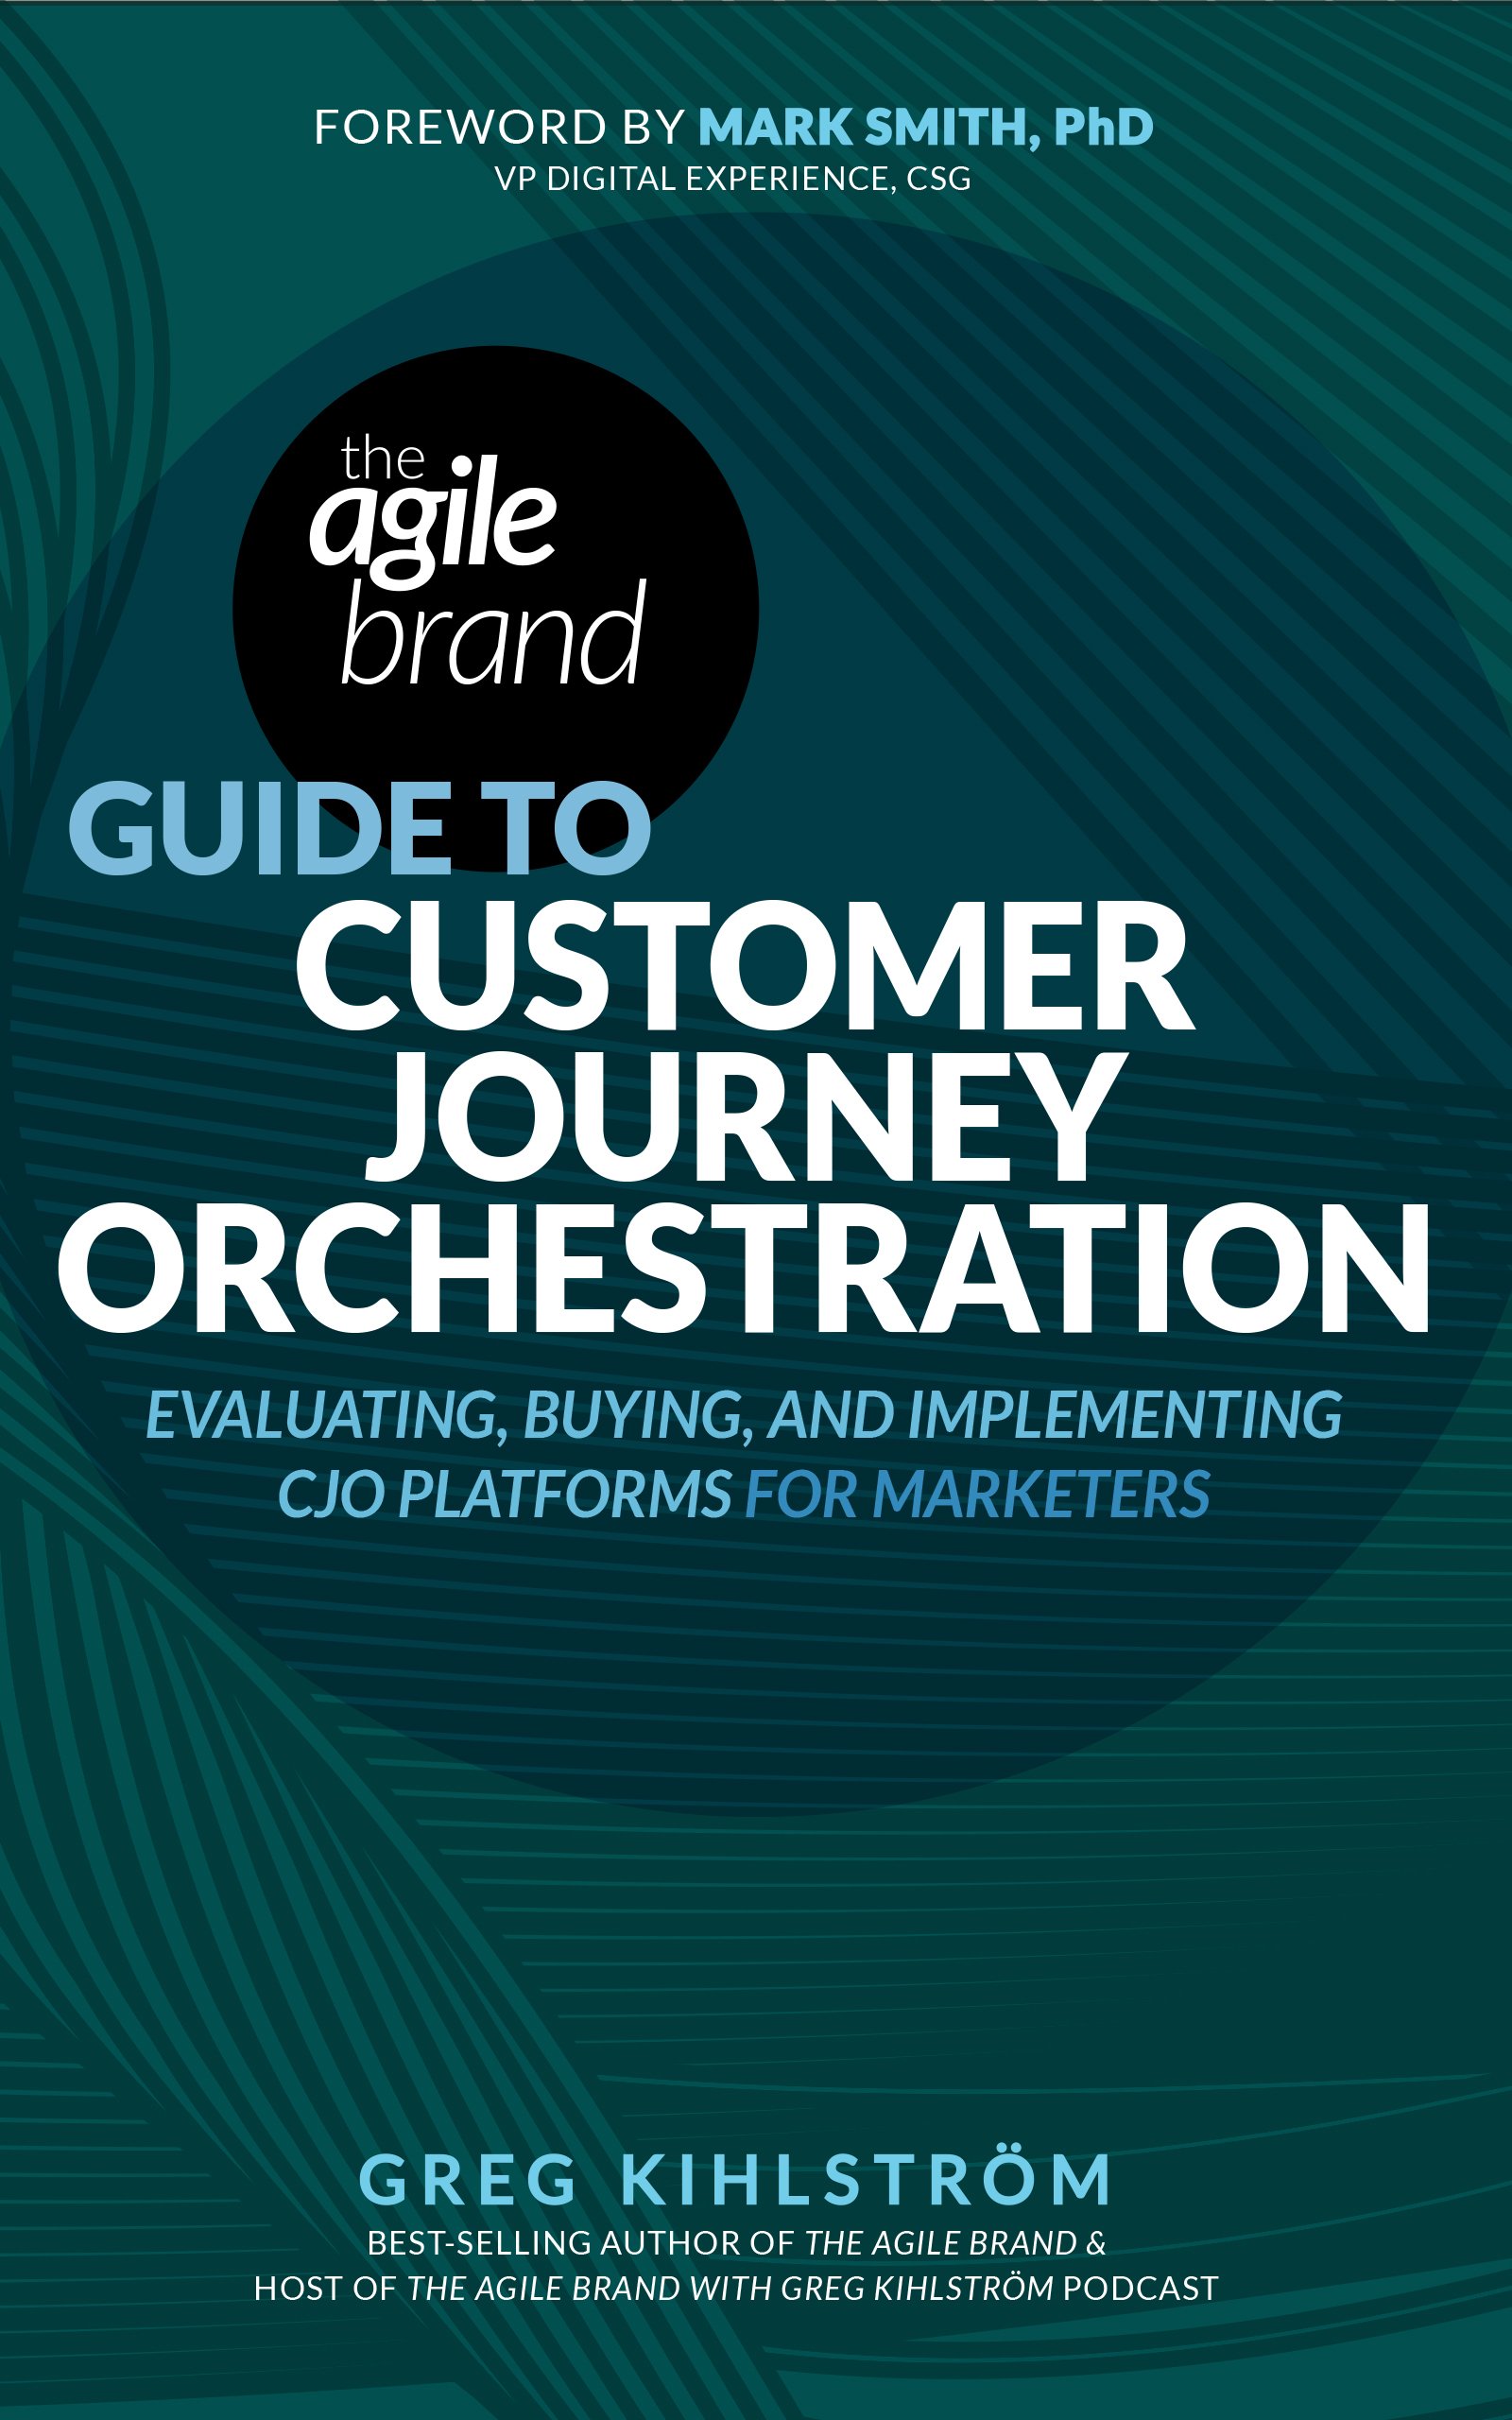 The Agile Brand Guide to Customer Journey Orchestration (Copy)